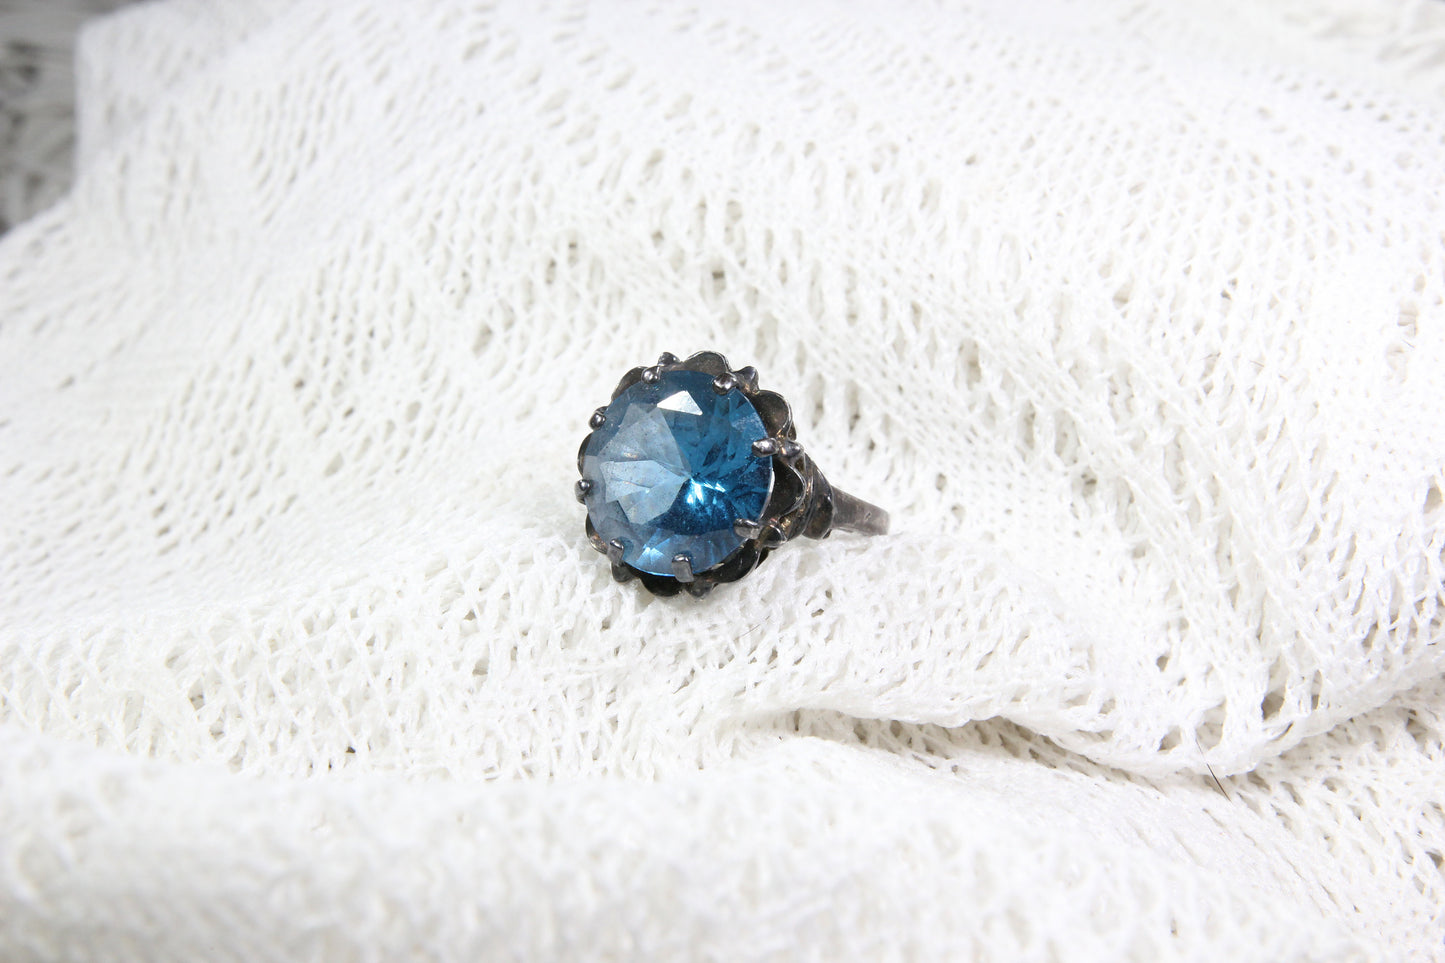 Ornate Sterling Silver Ring with Large Translucent Blue Stone, Size 7